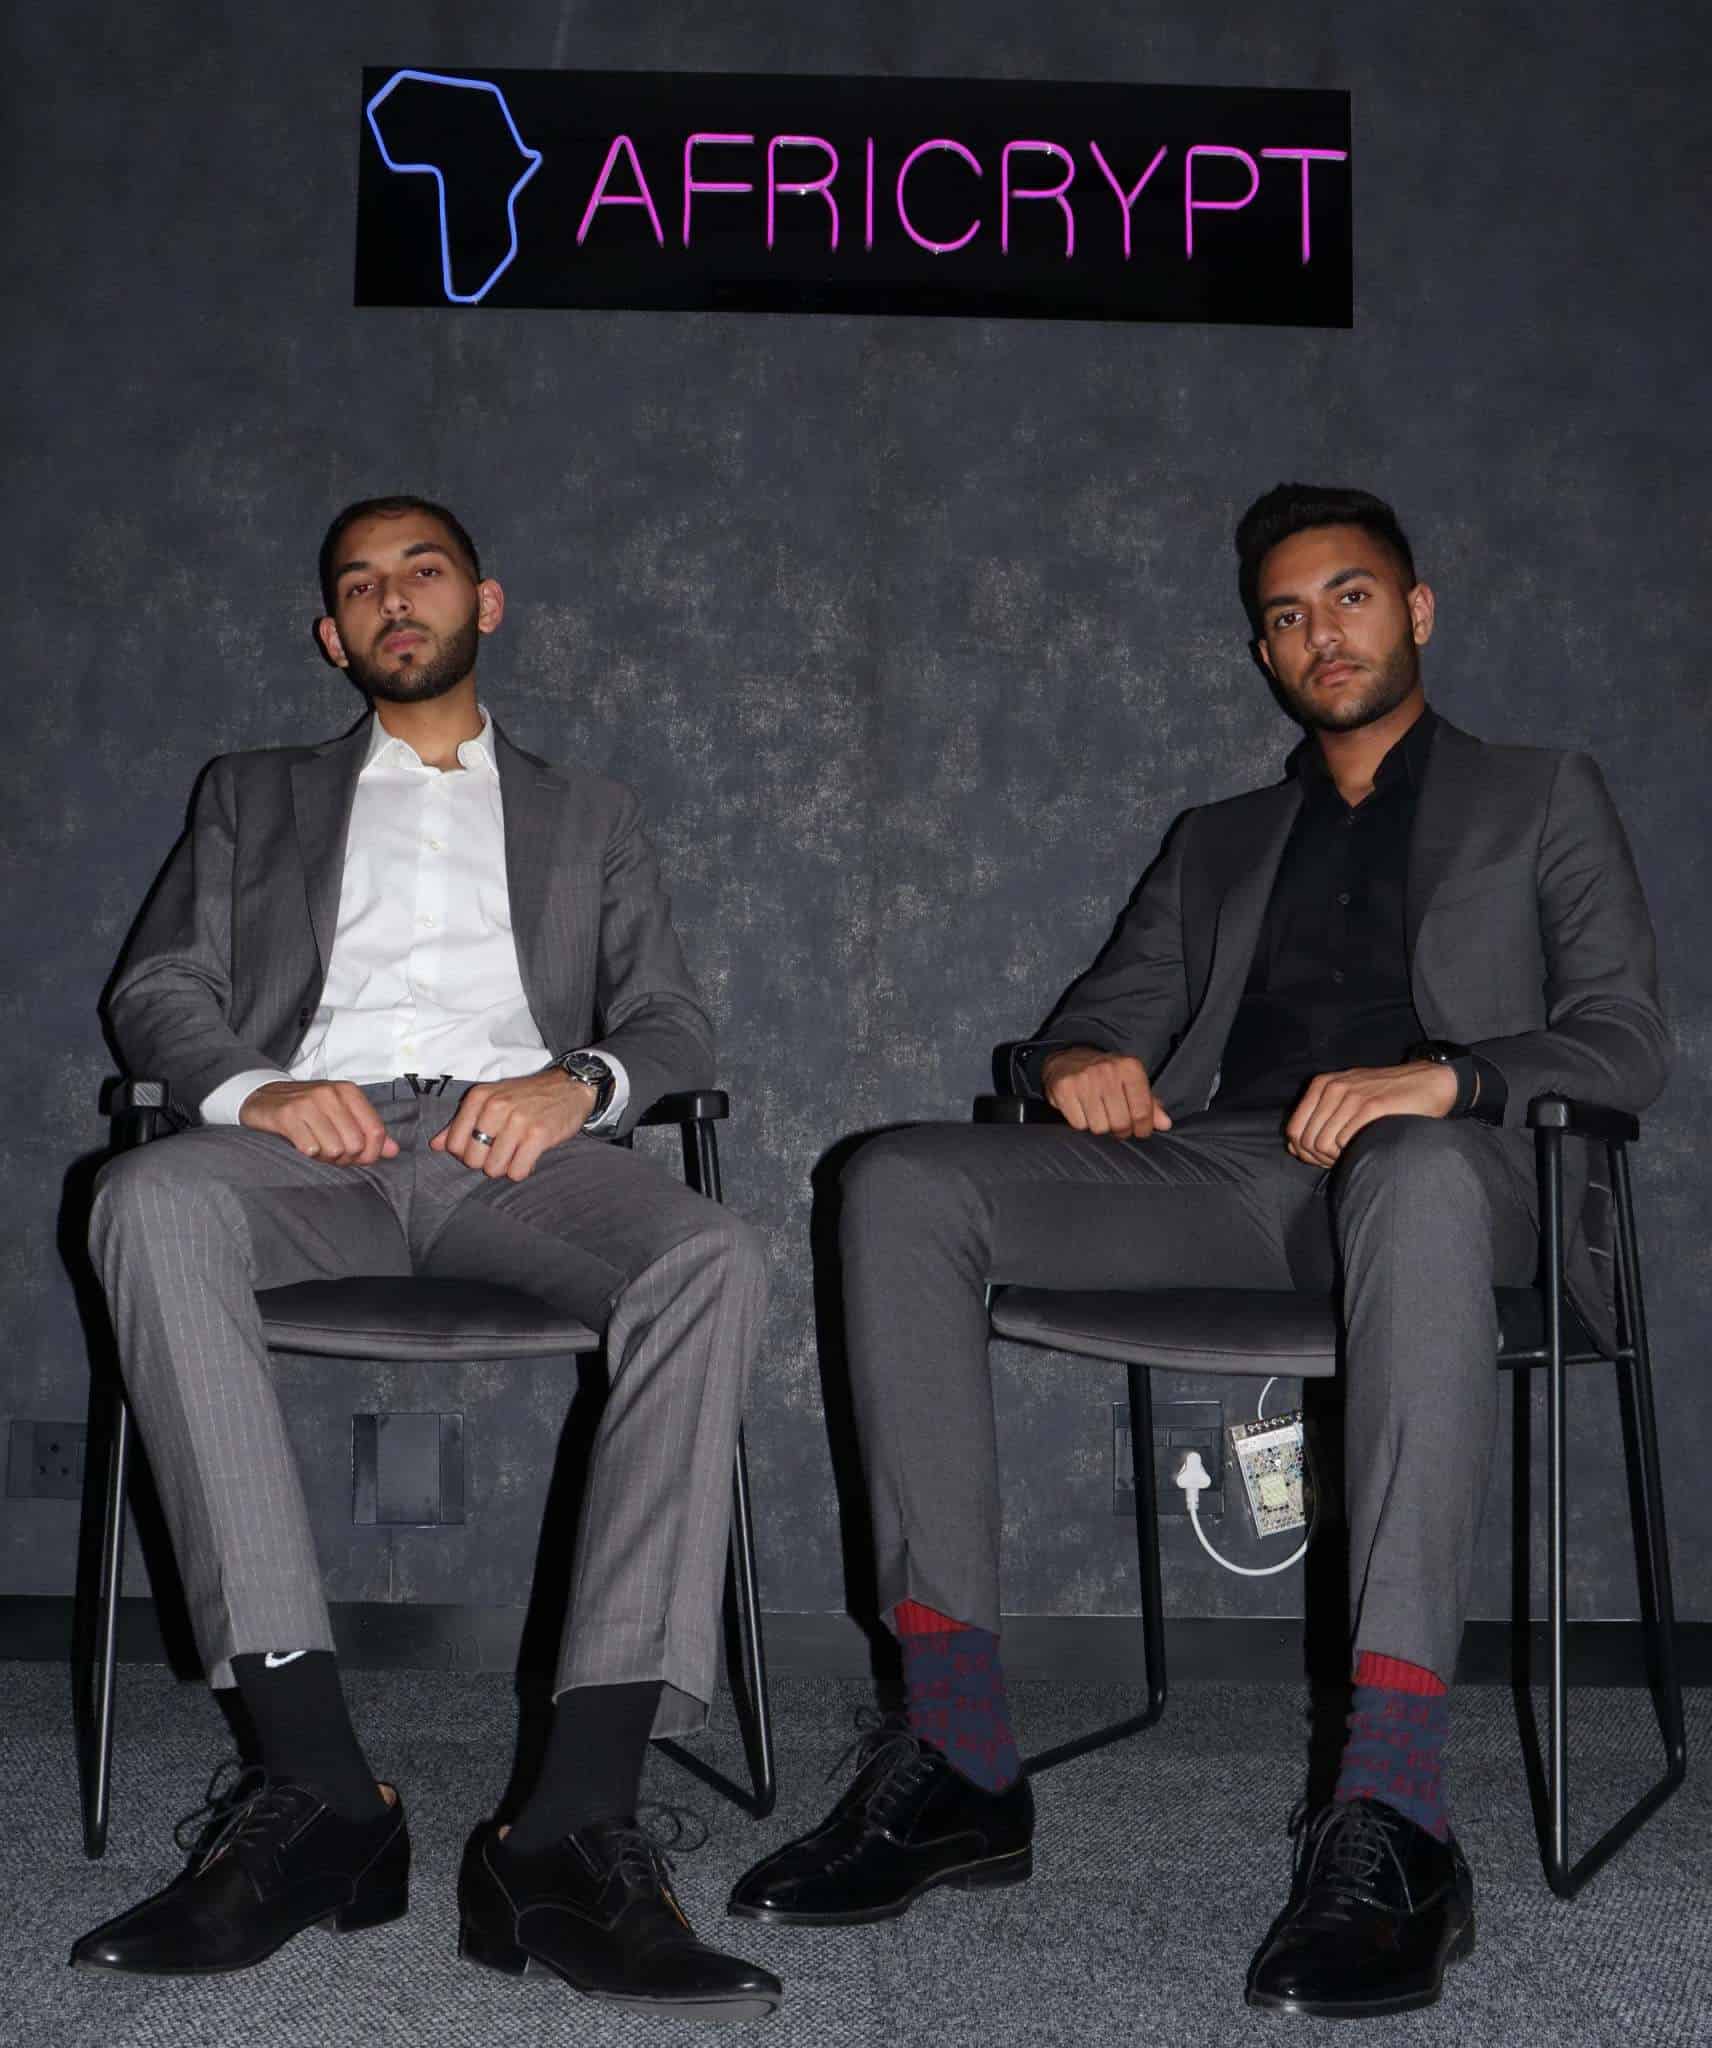 AFRICRYPT BITCOIN HEIST: Cajee brothers fear for their lives over US$3.6 billion crypto platform hack